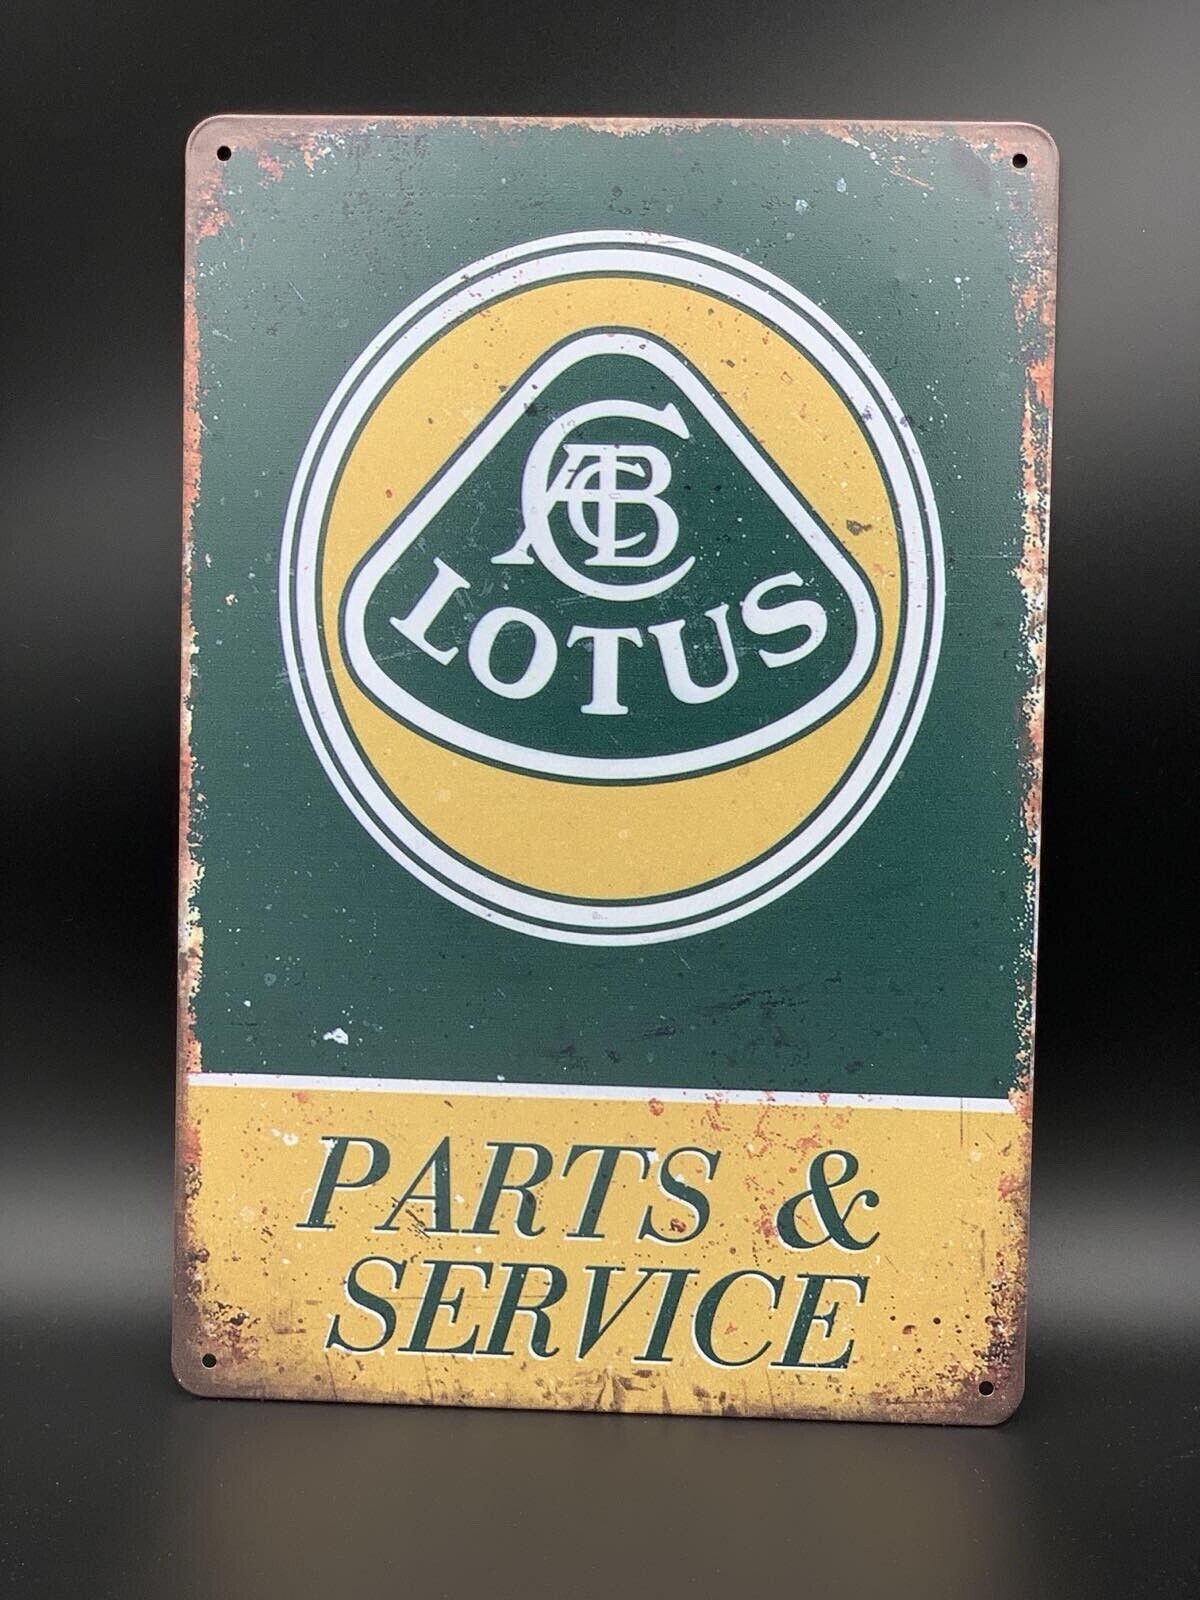 Garage Sign with Lotus Parts & Service